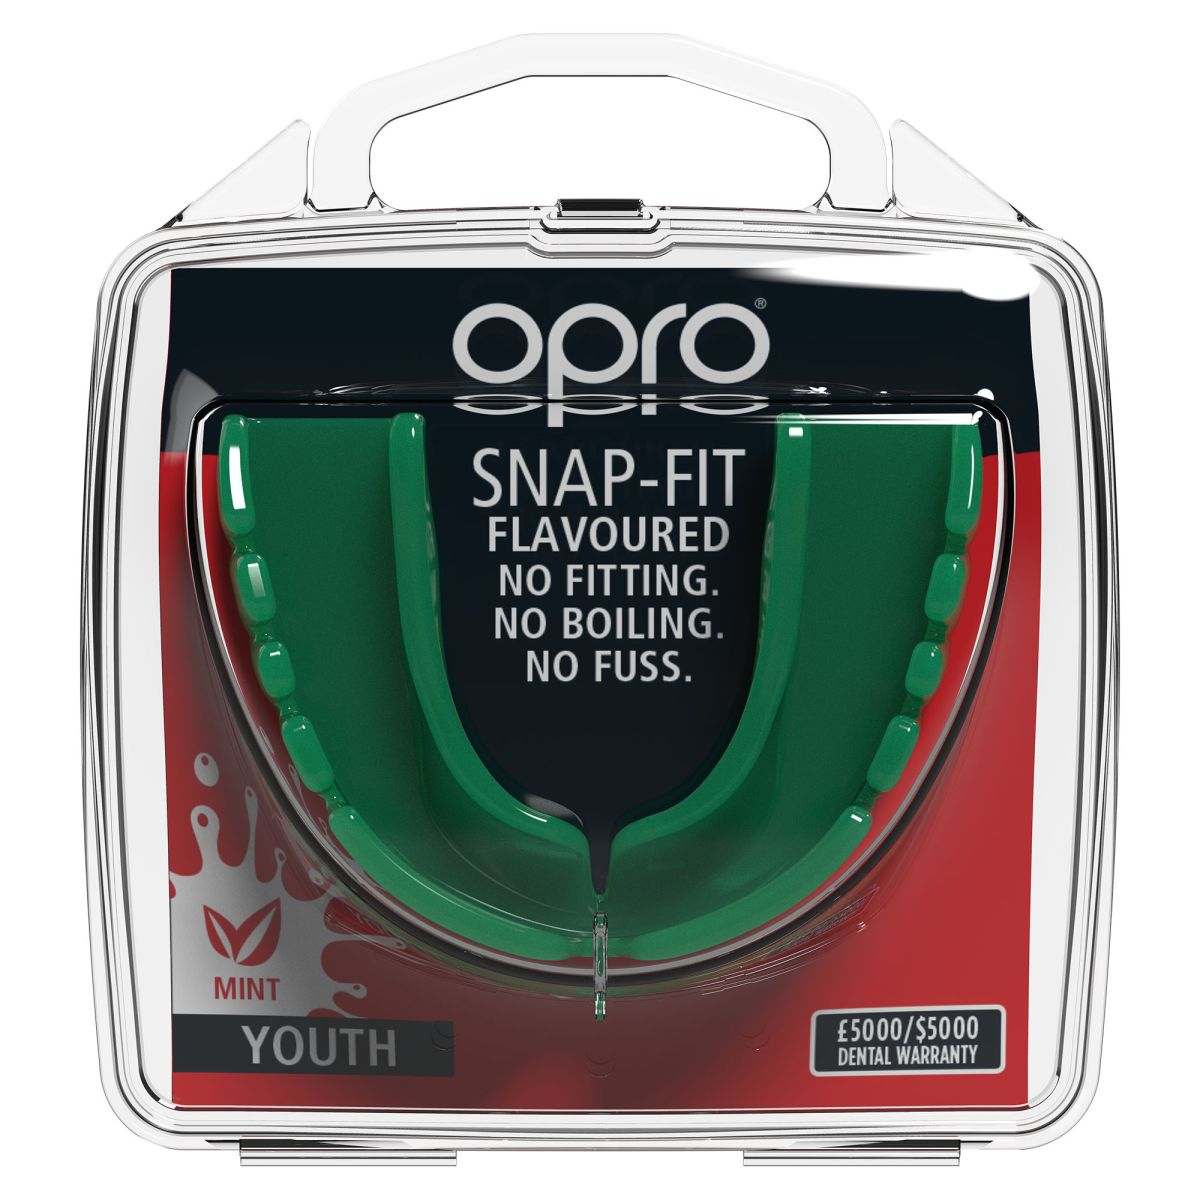 OPRO Snap-Fit Mint Flavoured Mouthguard Junior